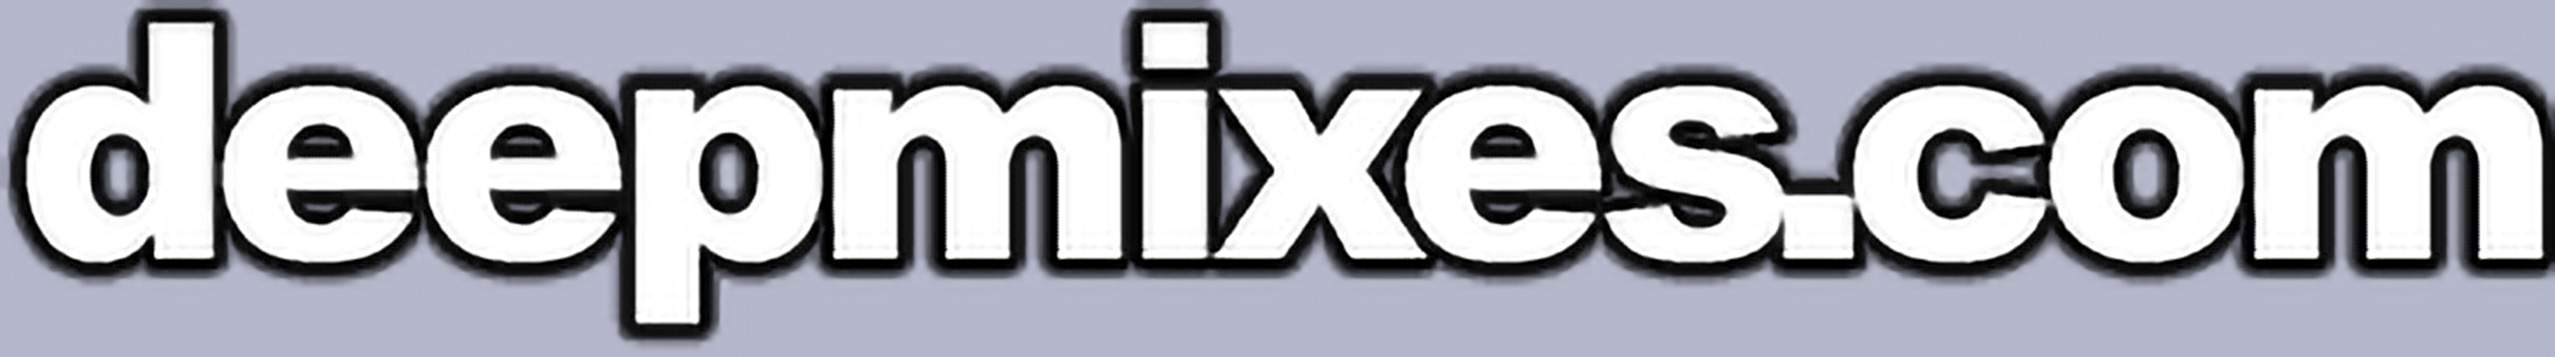 The word ‘deepmixes.com’ in large bold letters on a light blue background.